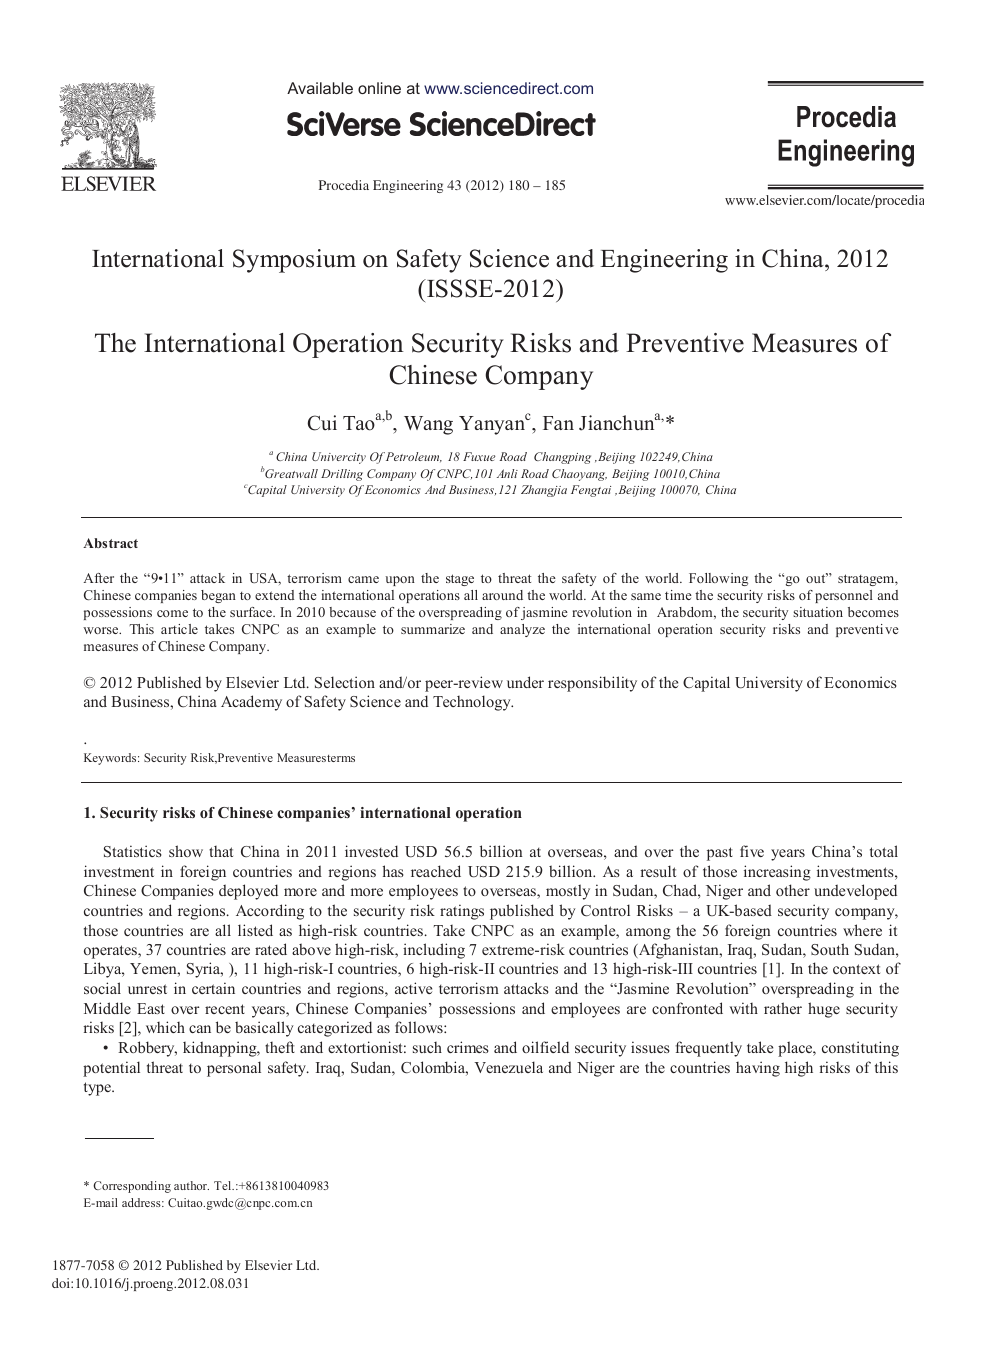 The International Operation Security Risks And Preventive Measures Of Chinese Company Topic Of Research Paper In Economics And Business Download Scholarly Article Pdf And Read For Free On Cyberleninka Open Science